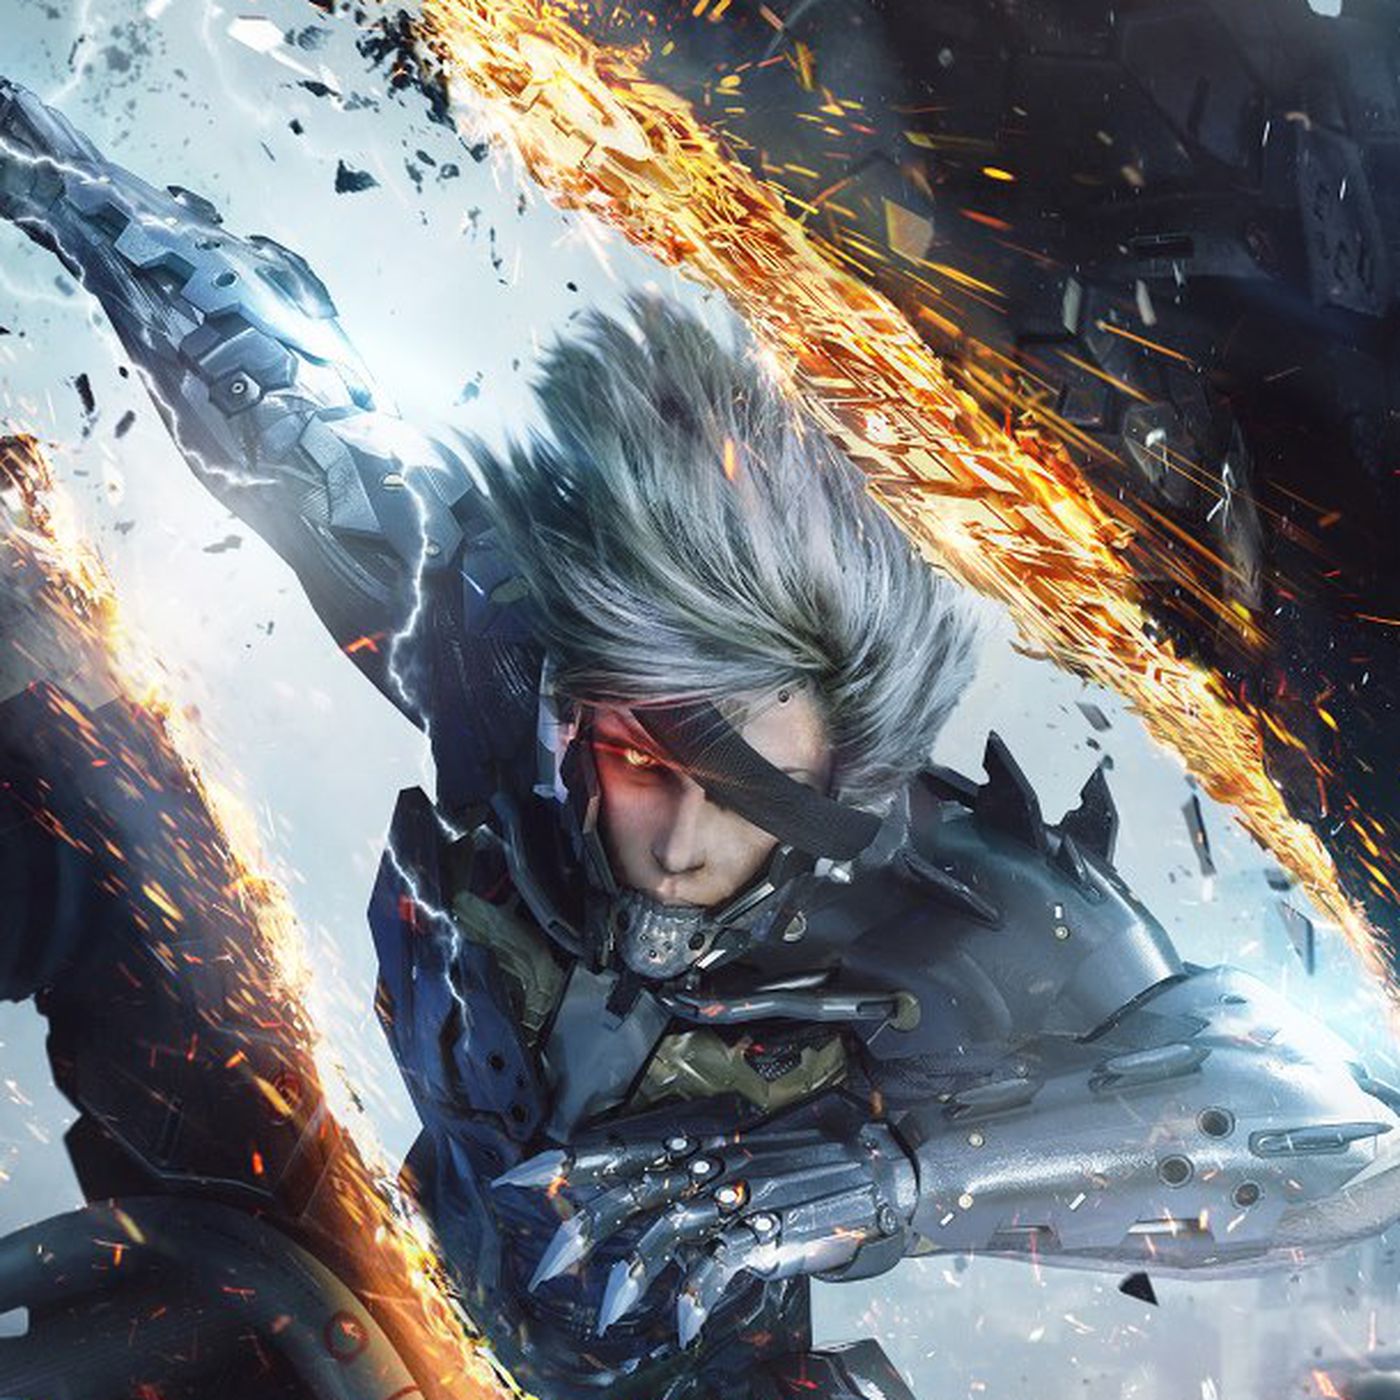 Metal Gear Rising: Revengeance' stands the test of time – Cavalier Chronicle